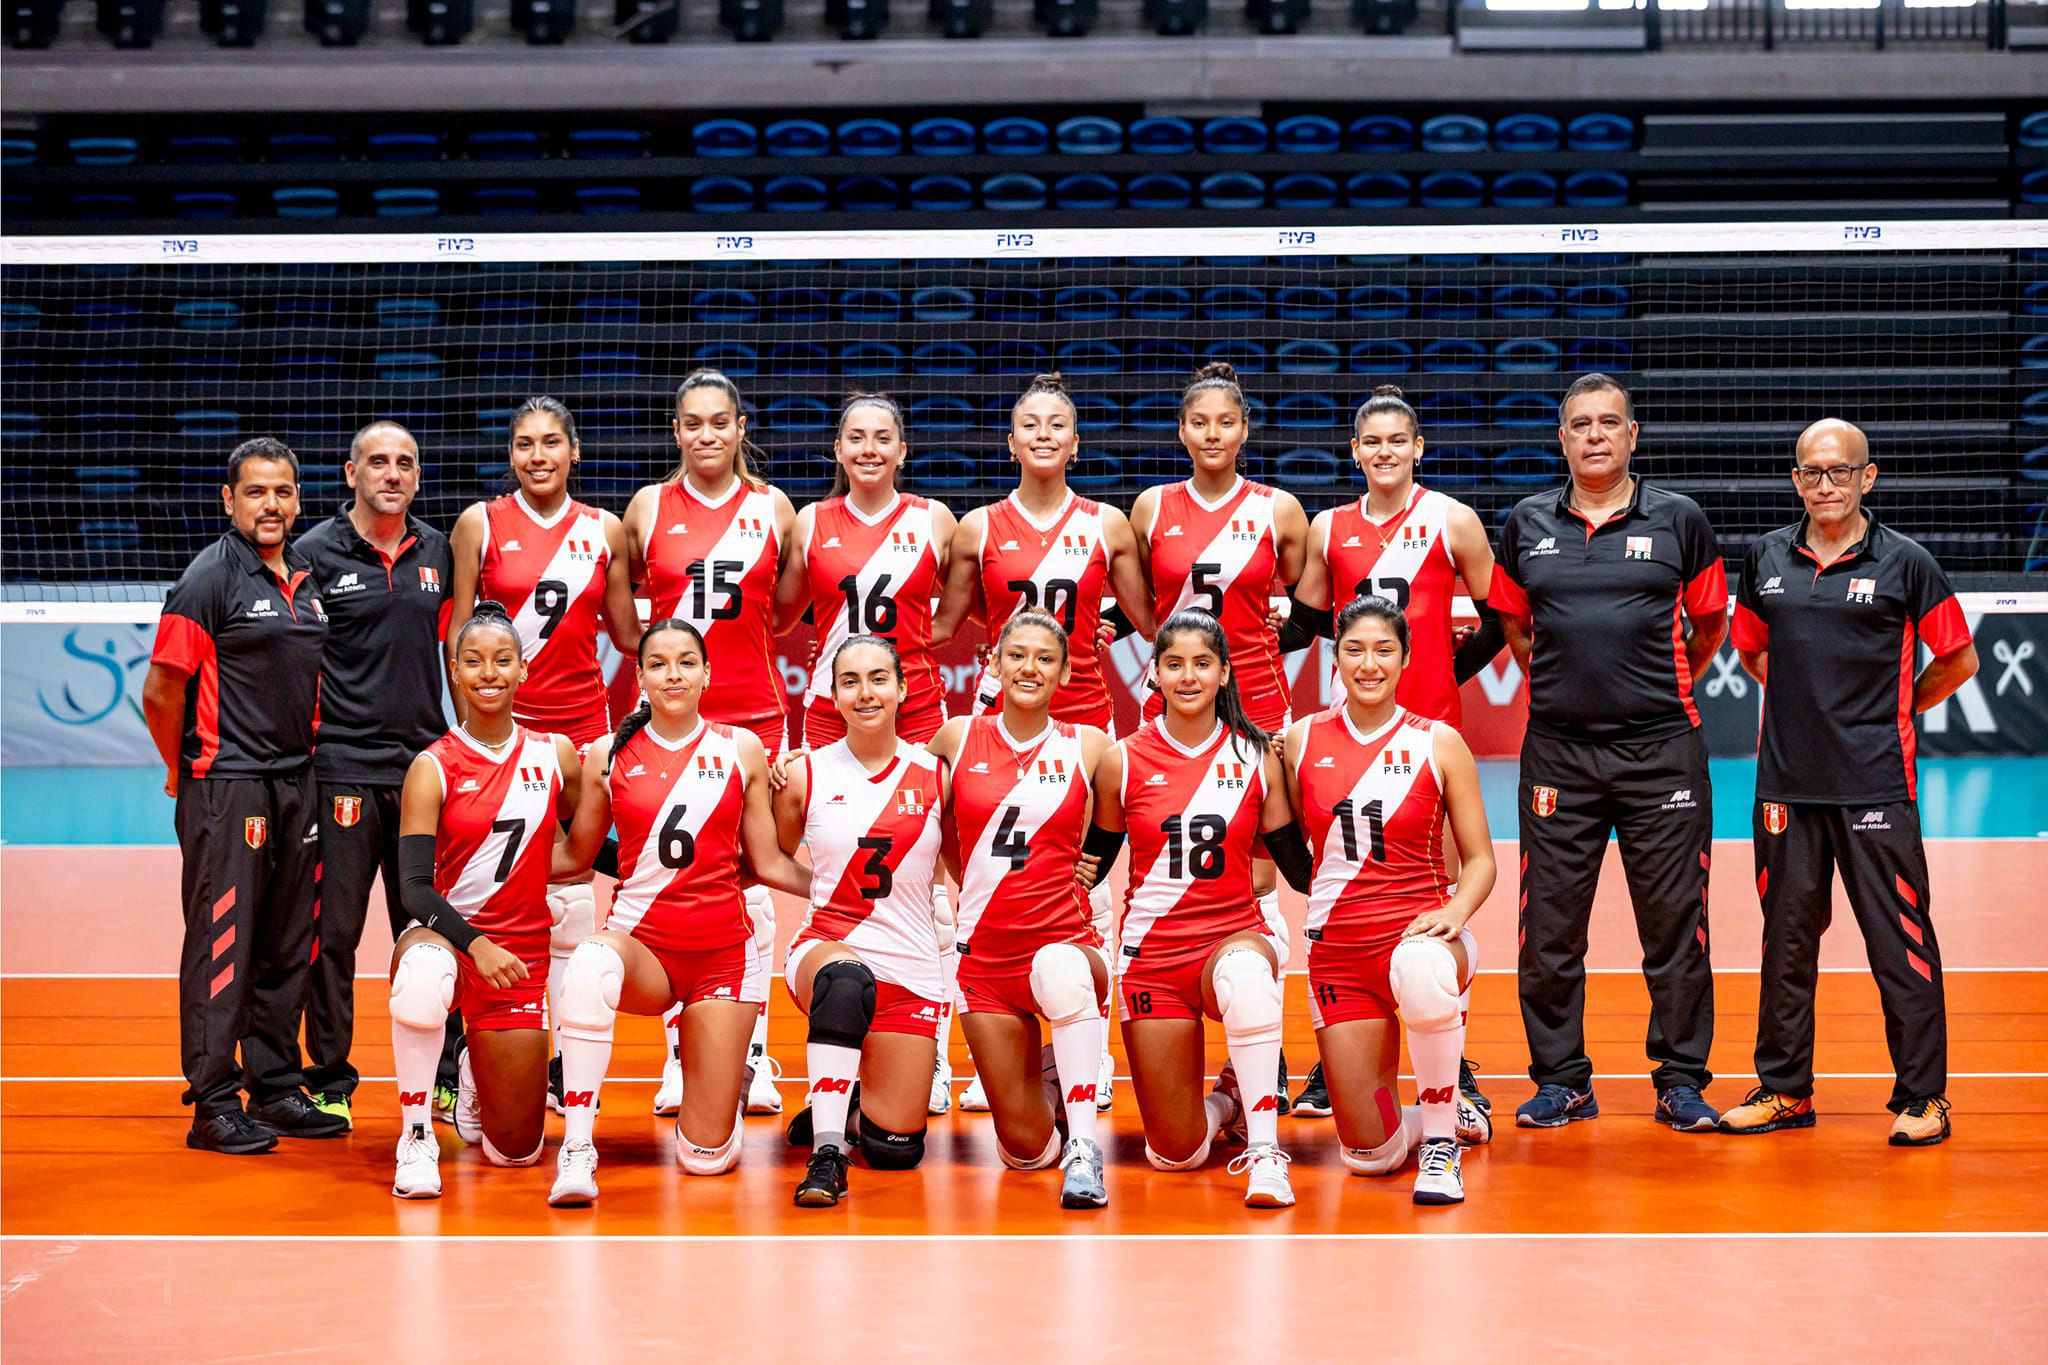 Peruvian team that represents us in the U-19 Volleyball World Cup